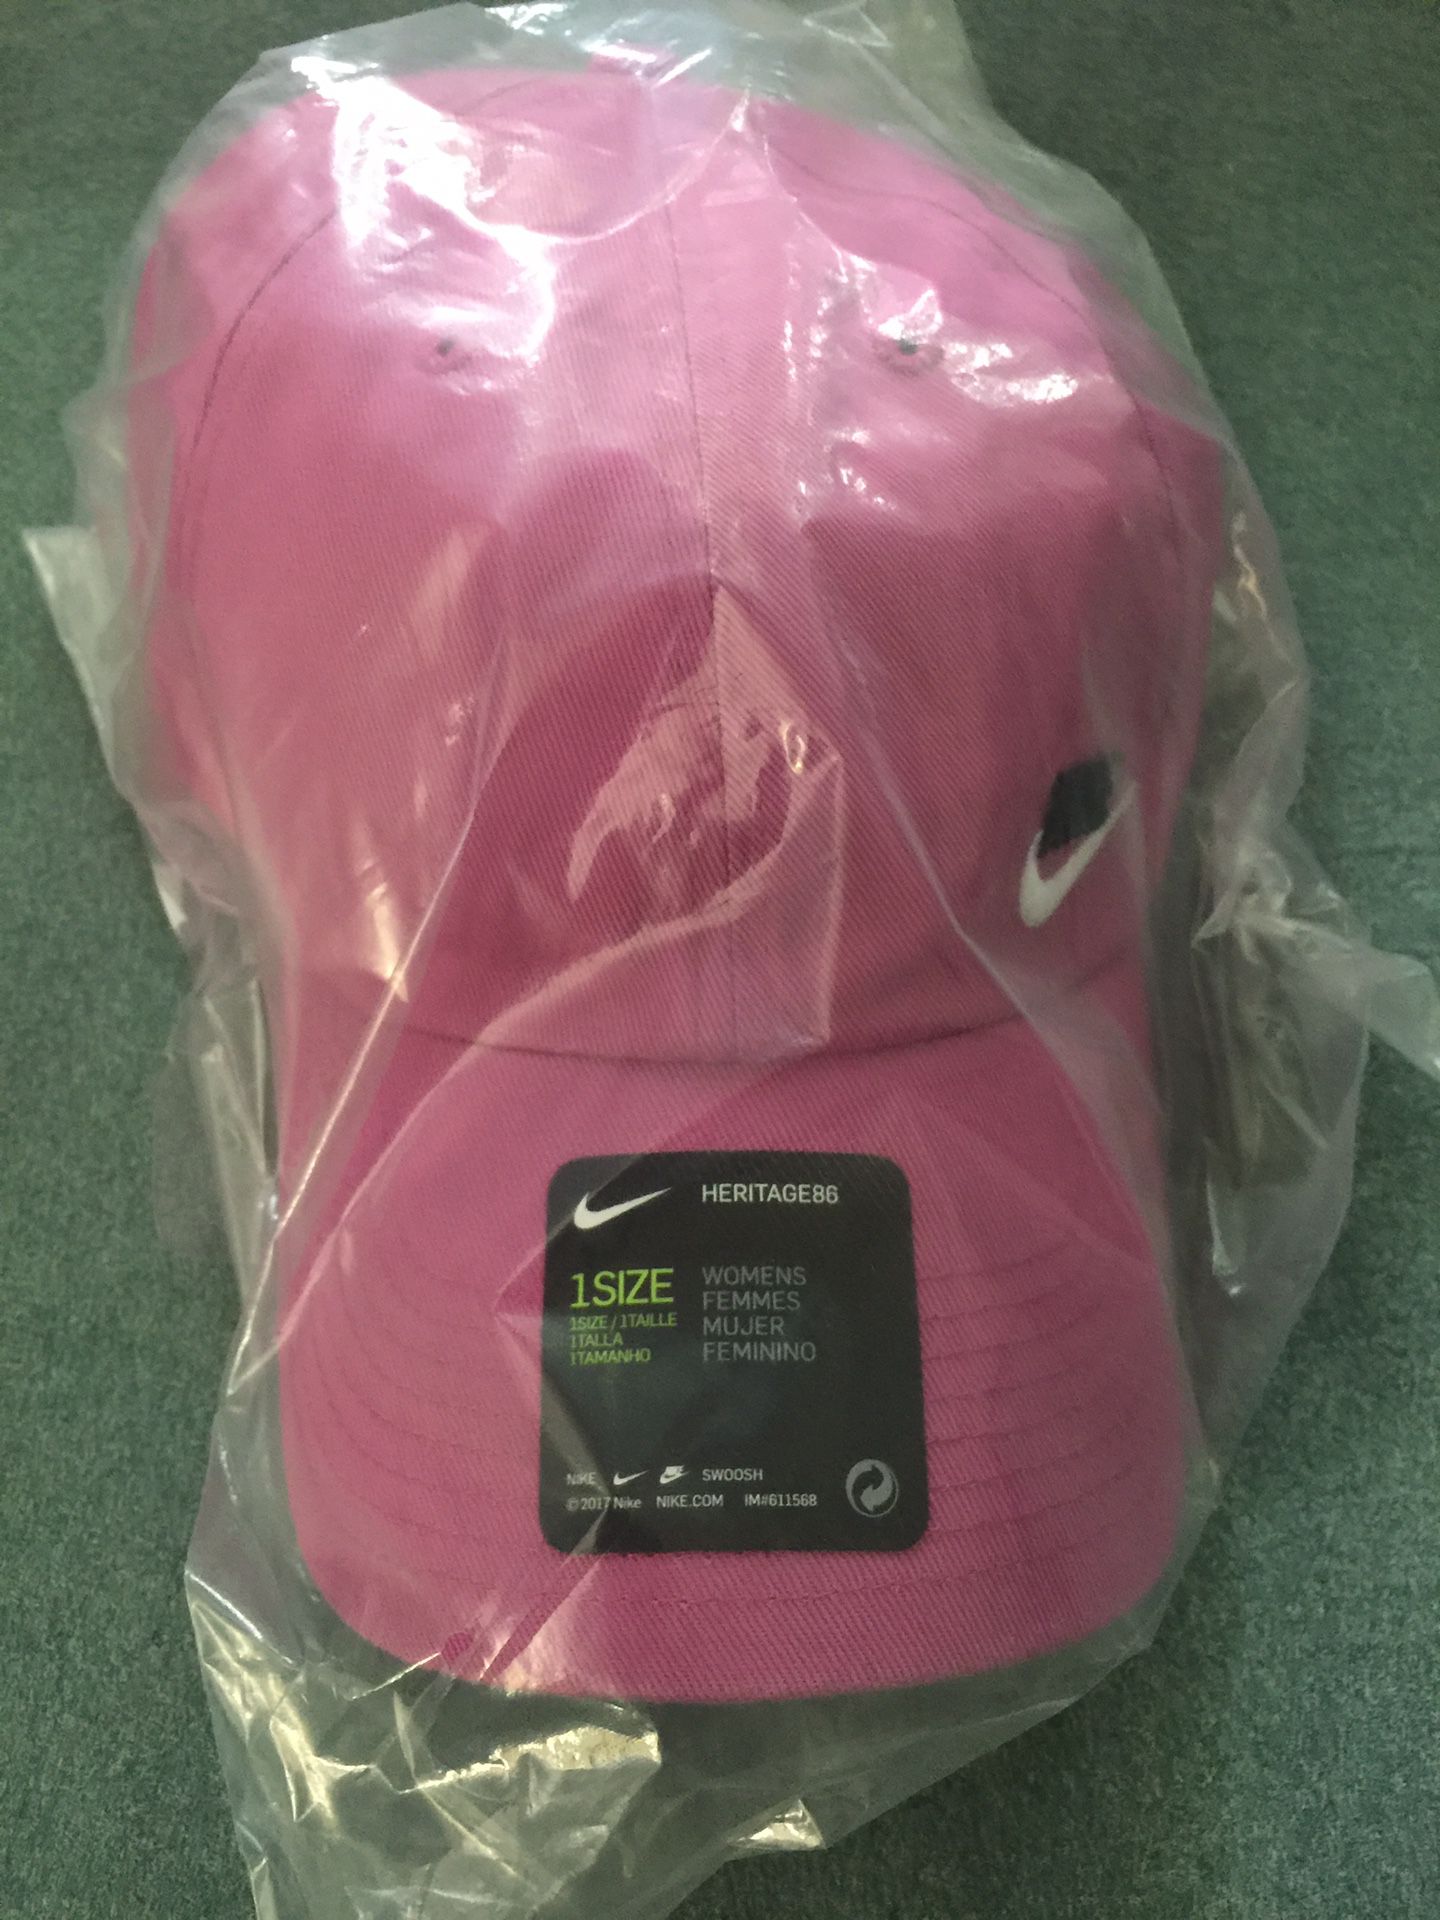 Nike Heritage Women’s Hat. Pink color. New with tags